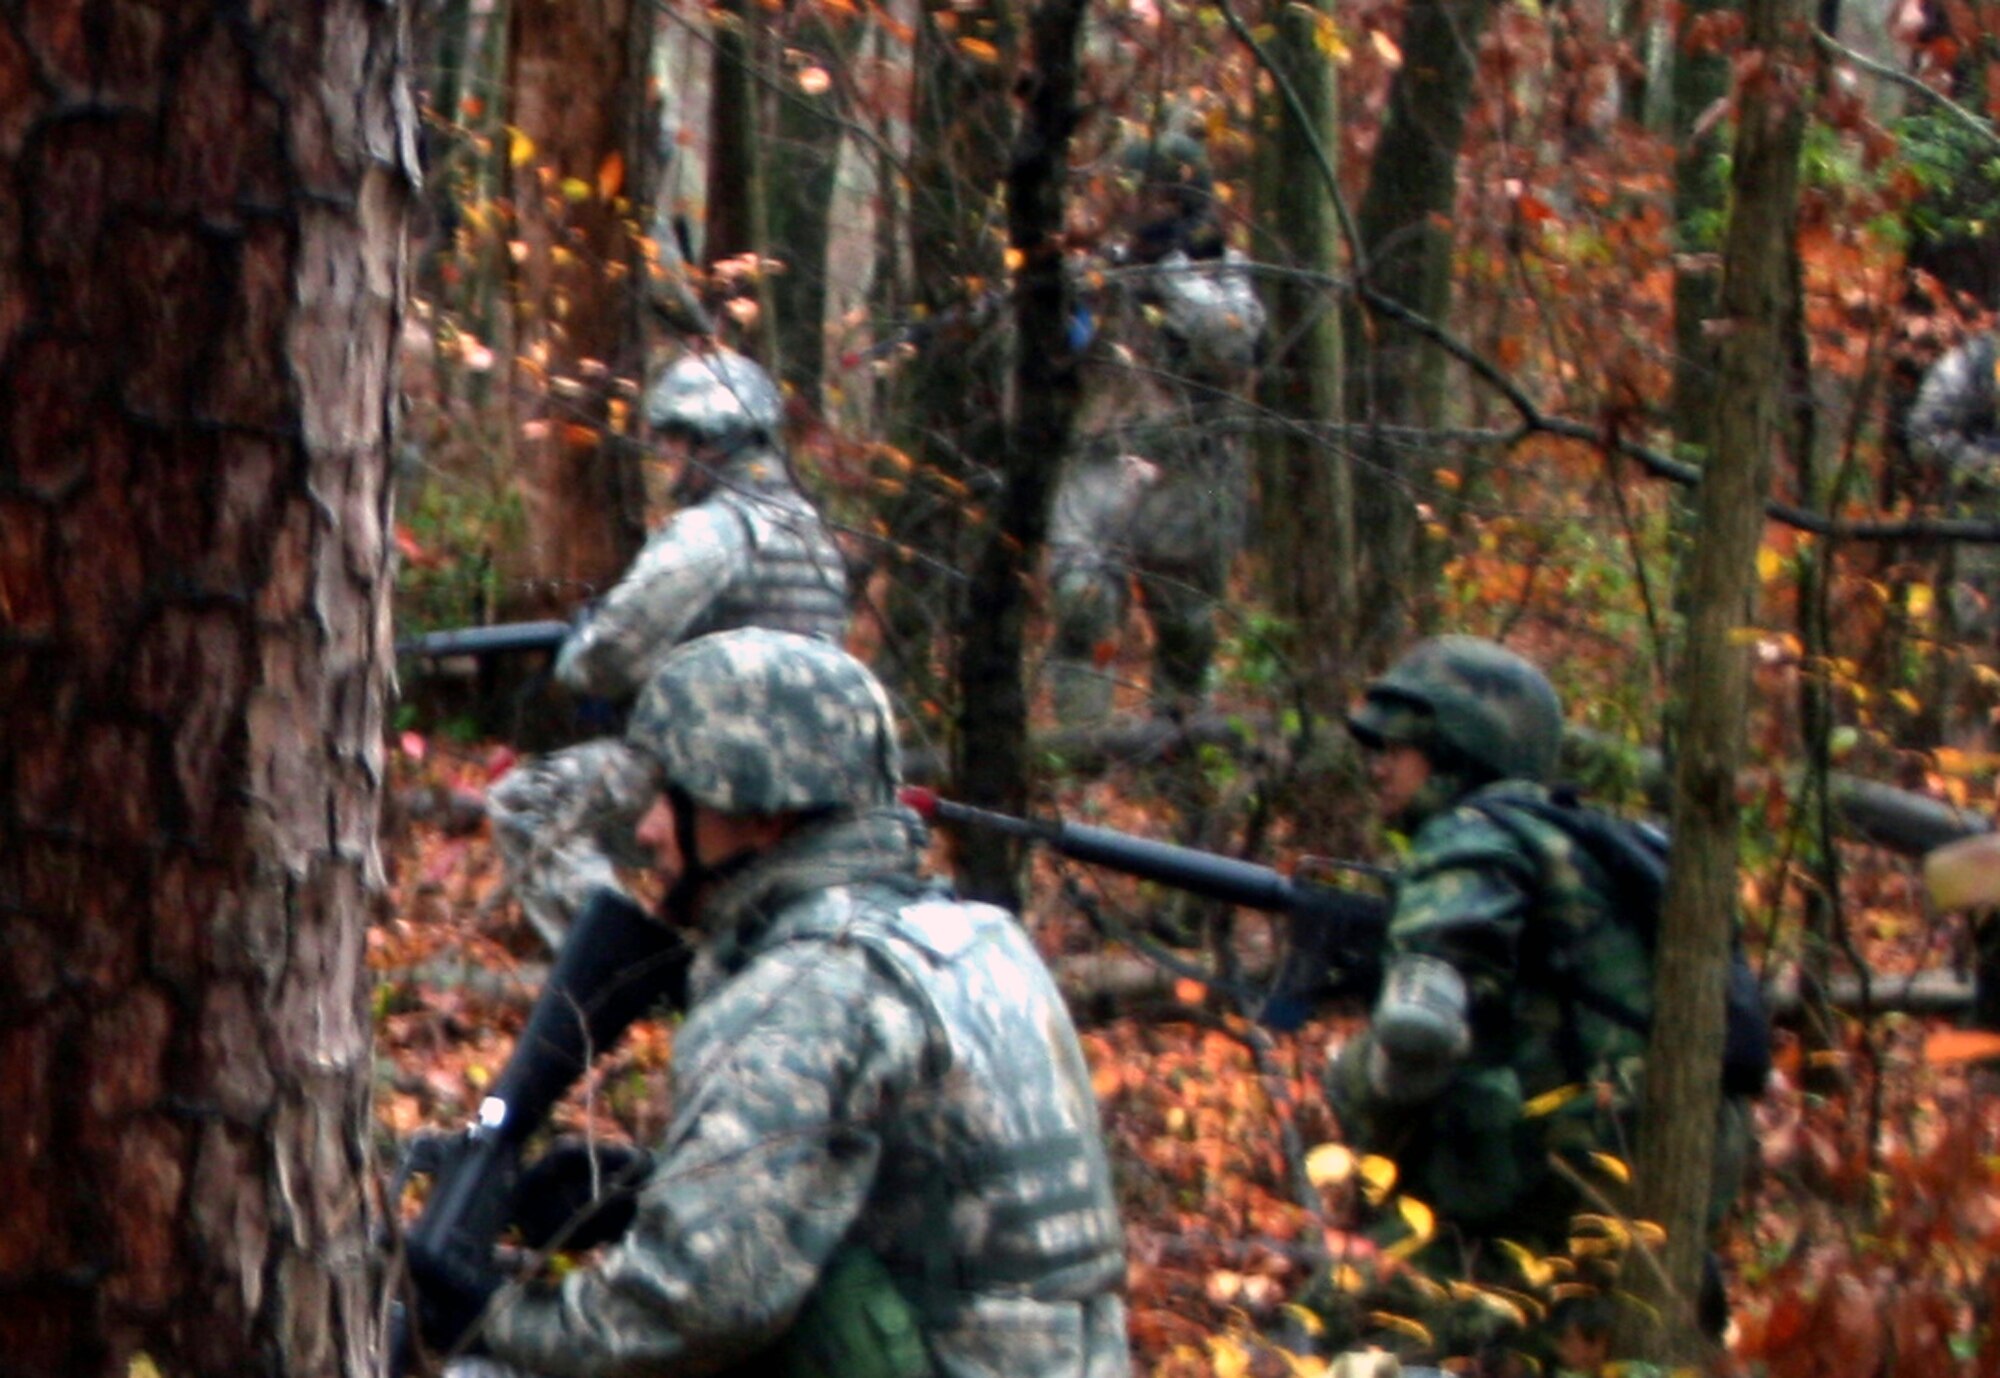 Students in the Combat Airman Skills Training Course 10-1A practice dismounted patrolling tactics during course training on Nov. 12, 2009, on a range at Joint Base McGuire-Dix-Lakehurst, N.J.  The course, taught by the U.S. Air Force Expeditionary Center's 421st Combat Training Squadron, prepares Airmen for upcoming deployments.  (U.S. Air Force Photo/Tech. Sgt. Scott T. Sturkol)